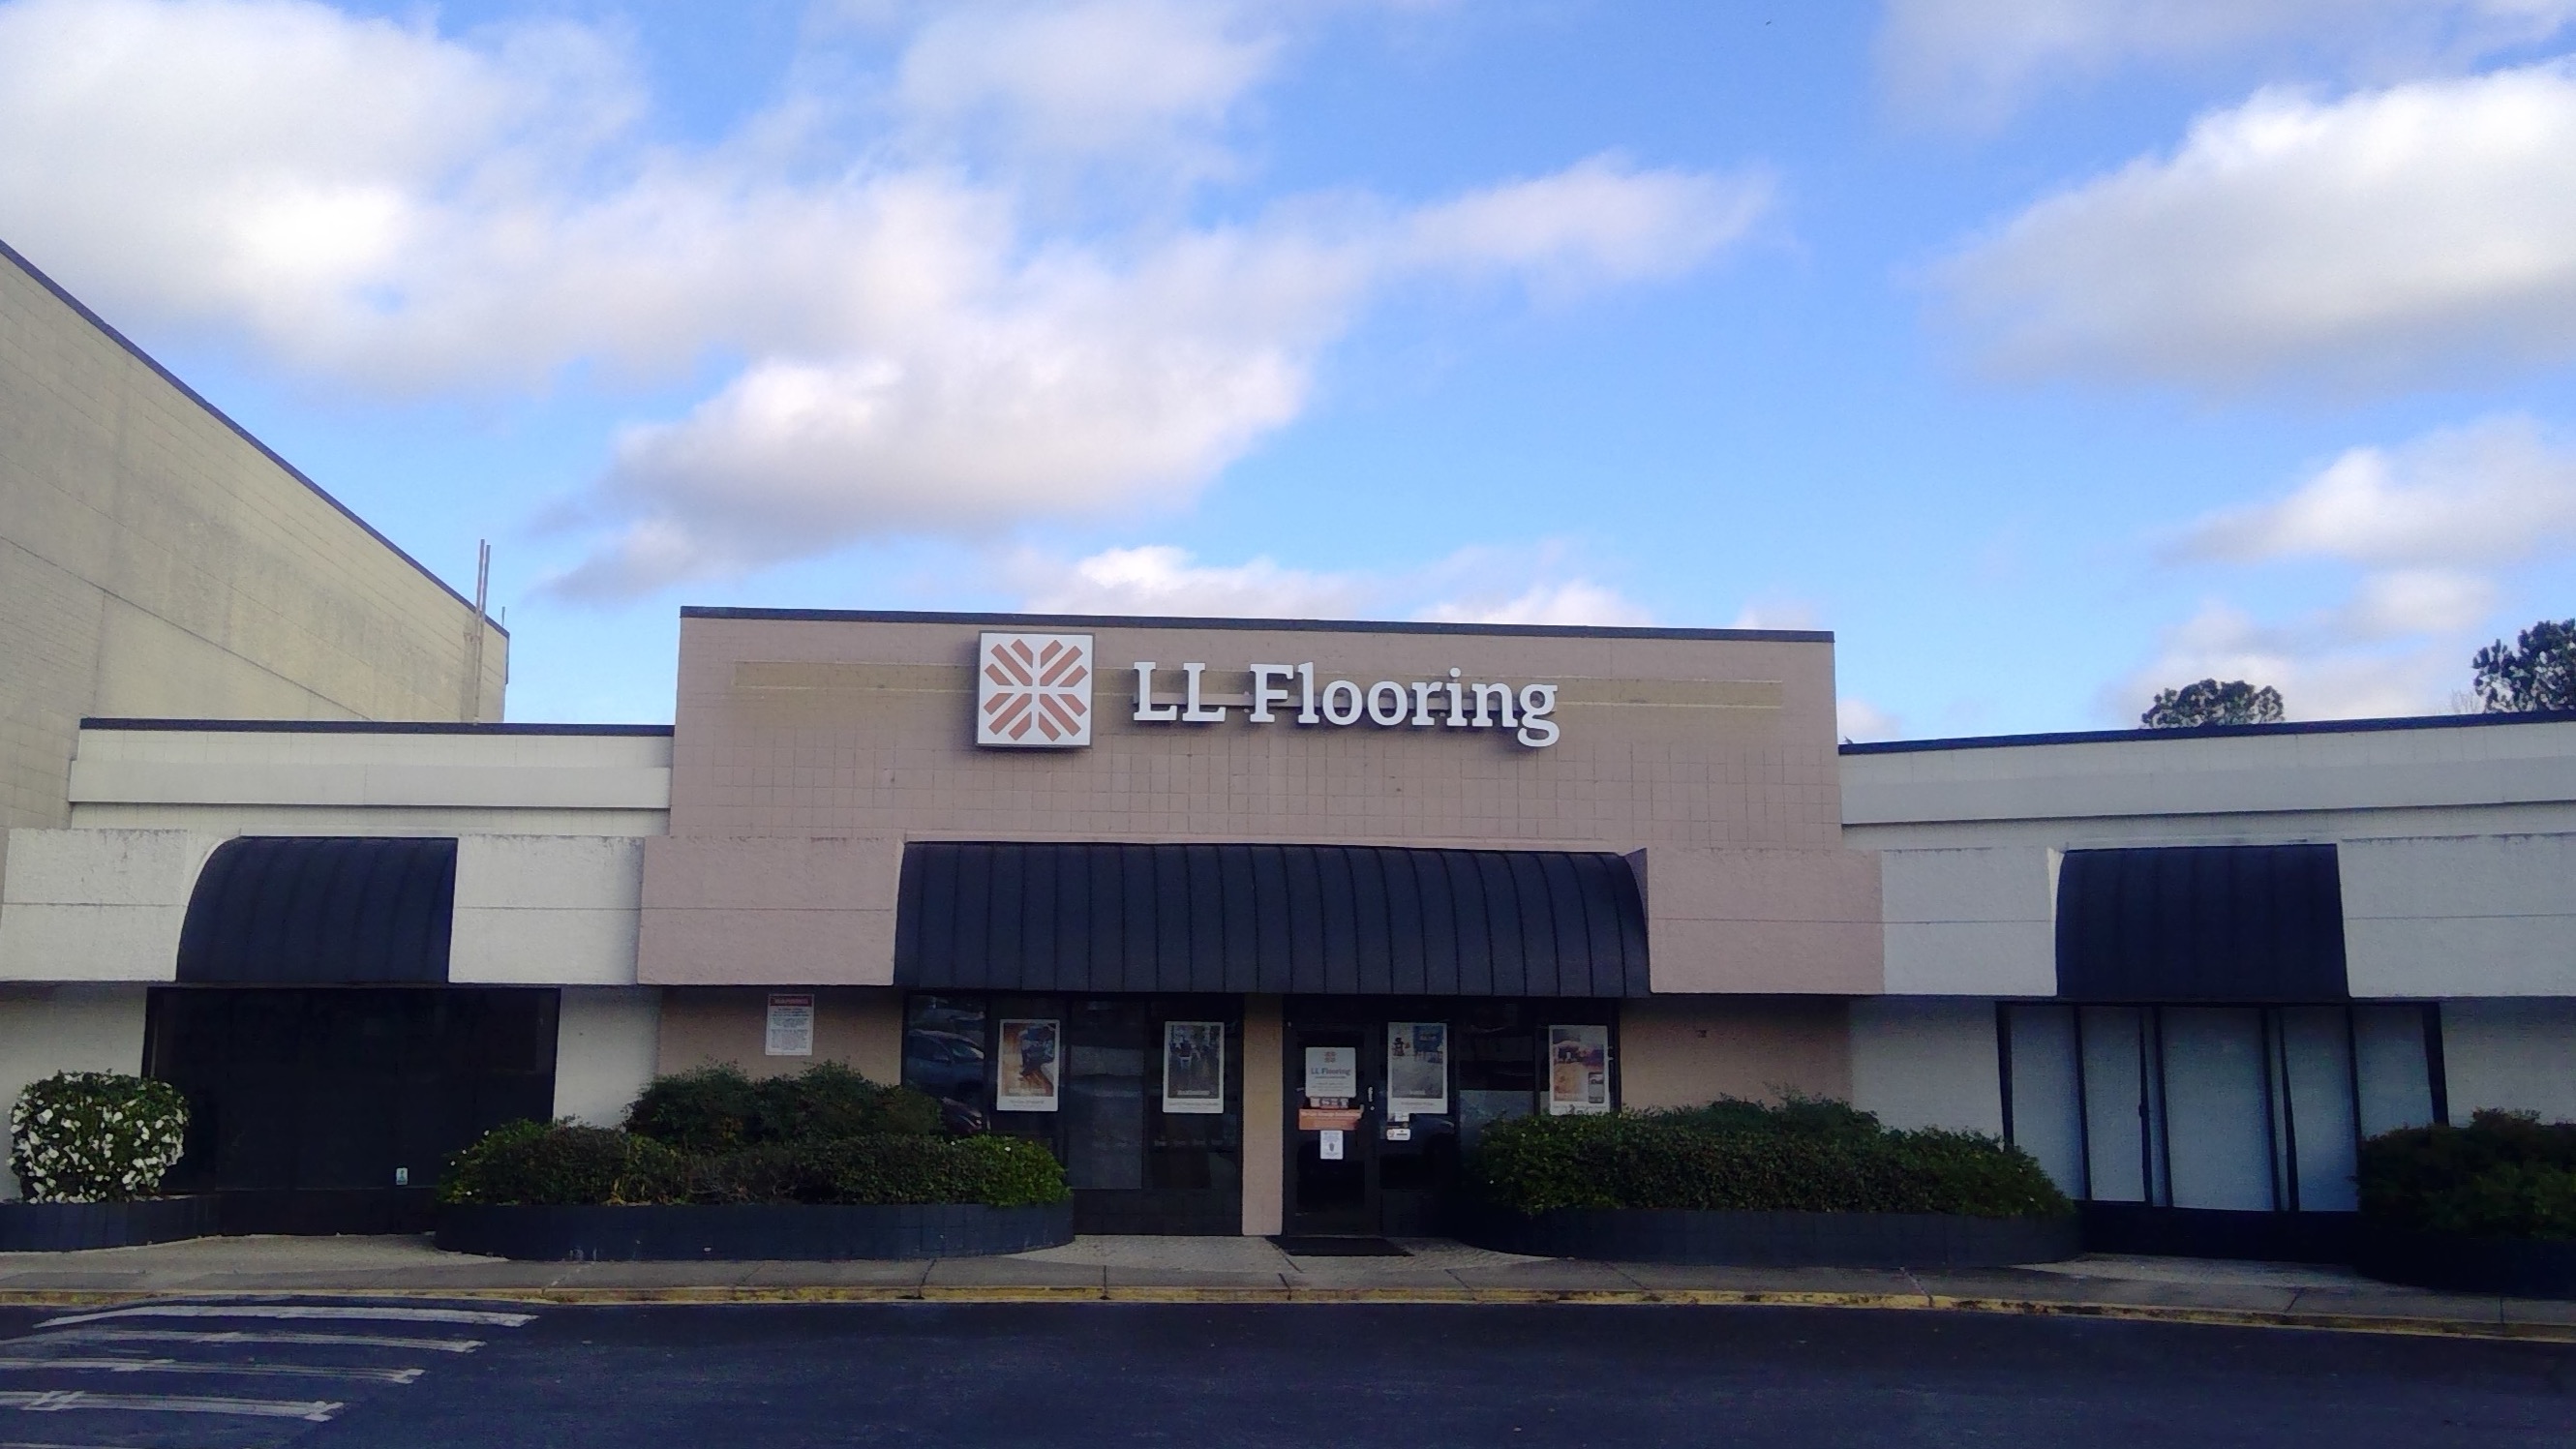 LL Flooring #1008 Conyers | 1820 Highway 20 SE | Storefront